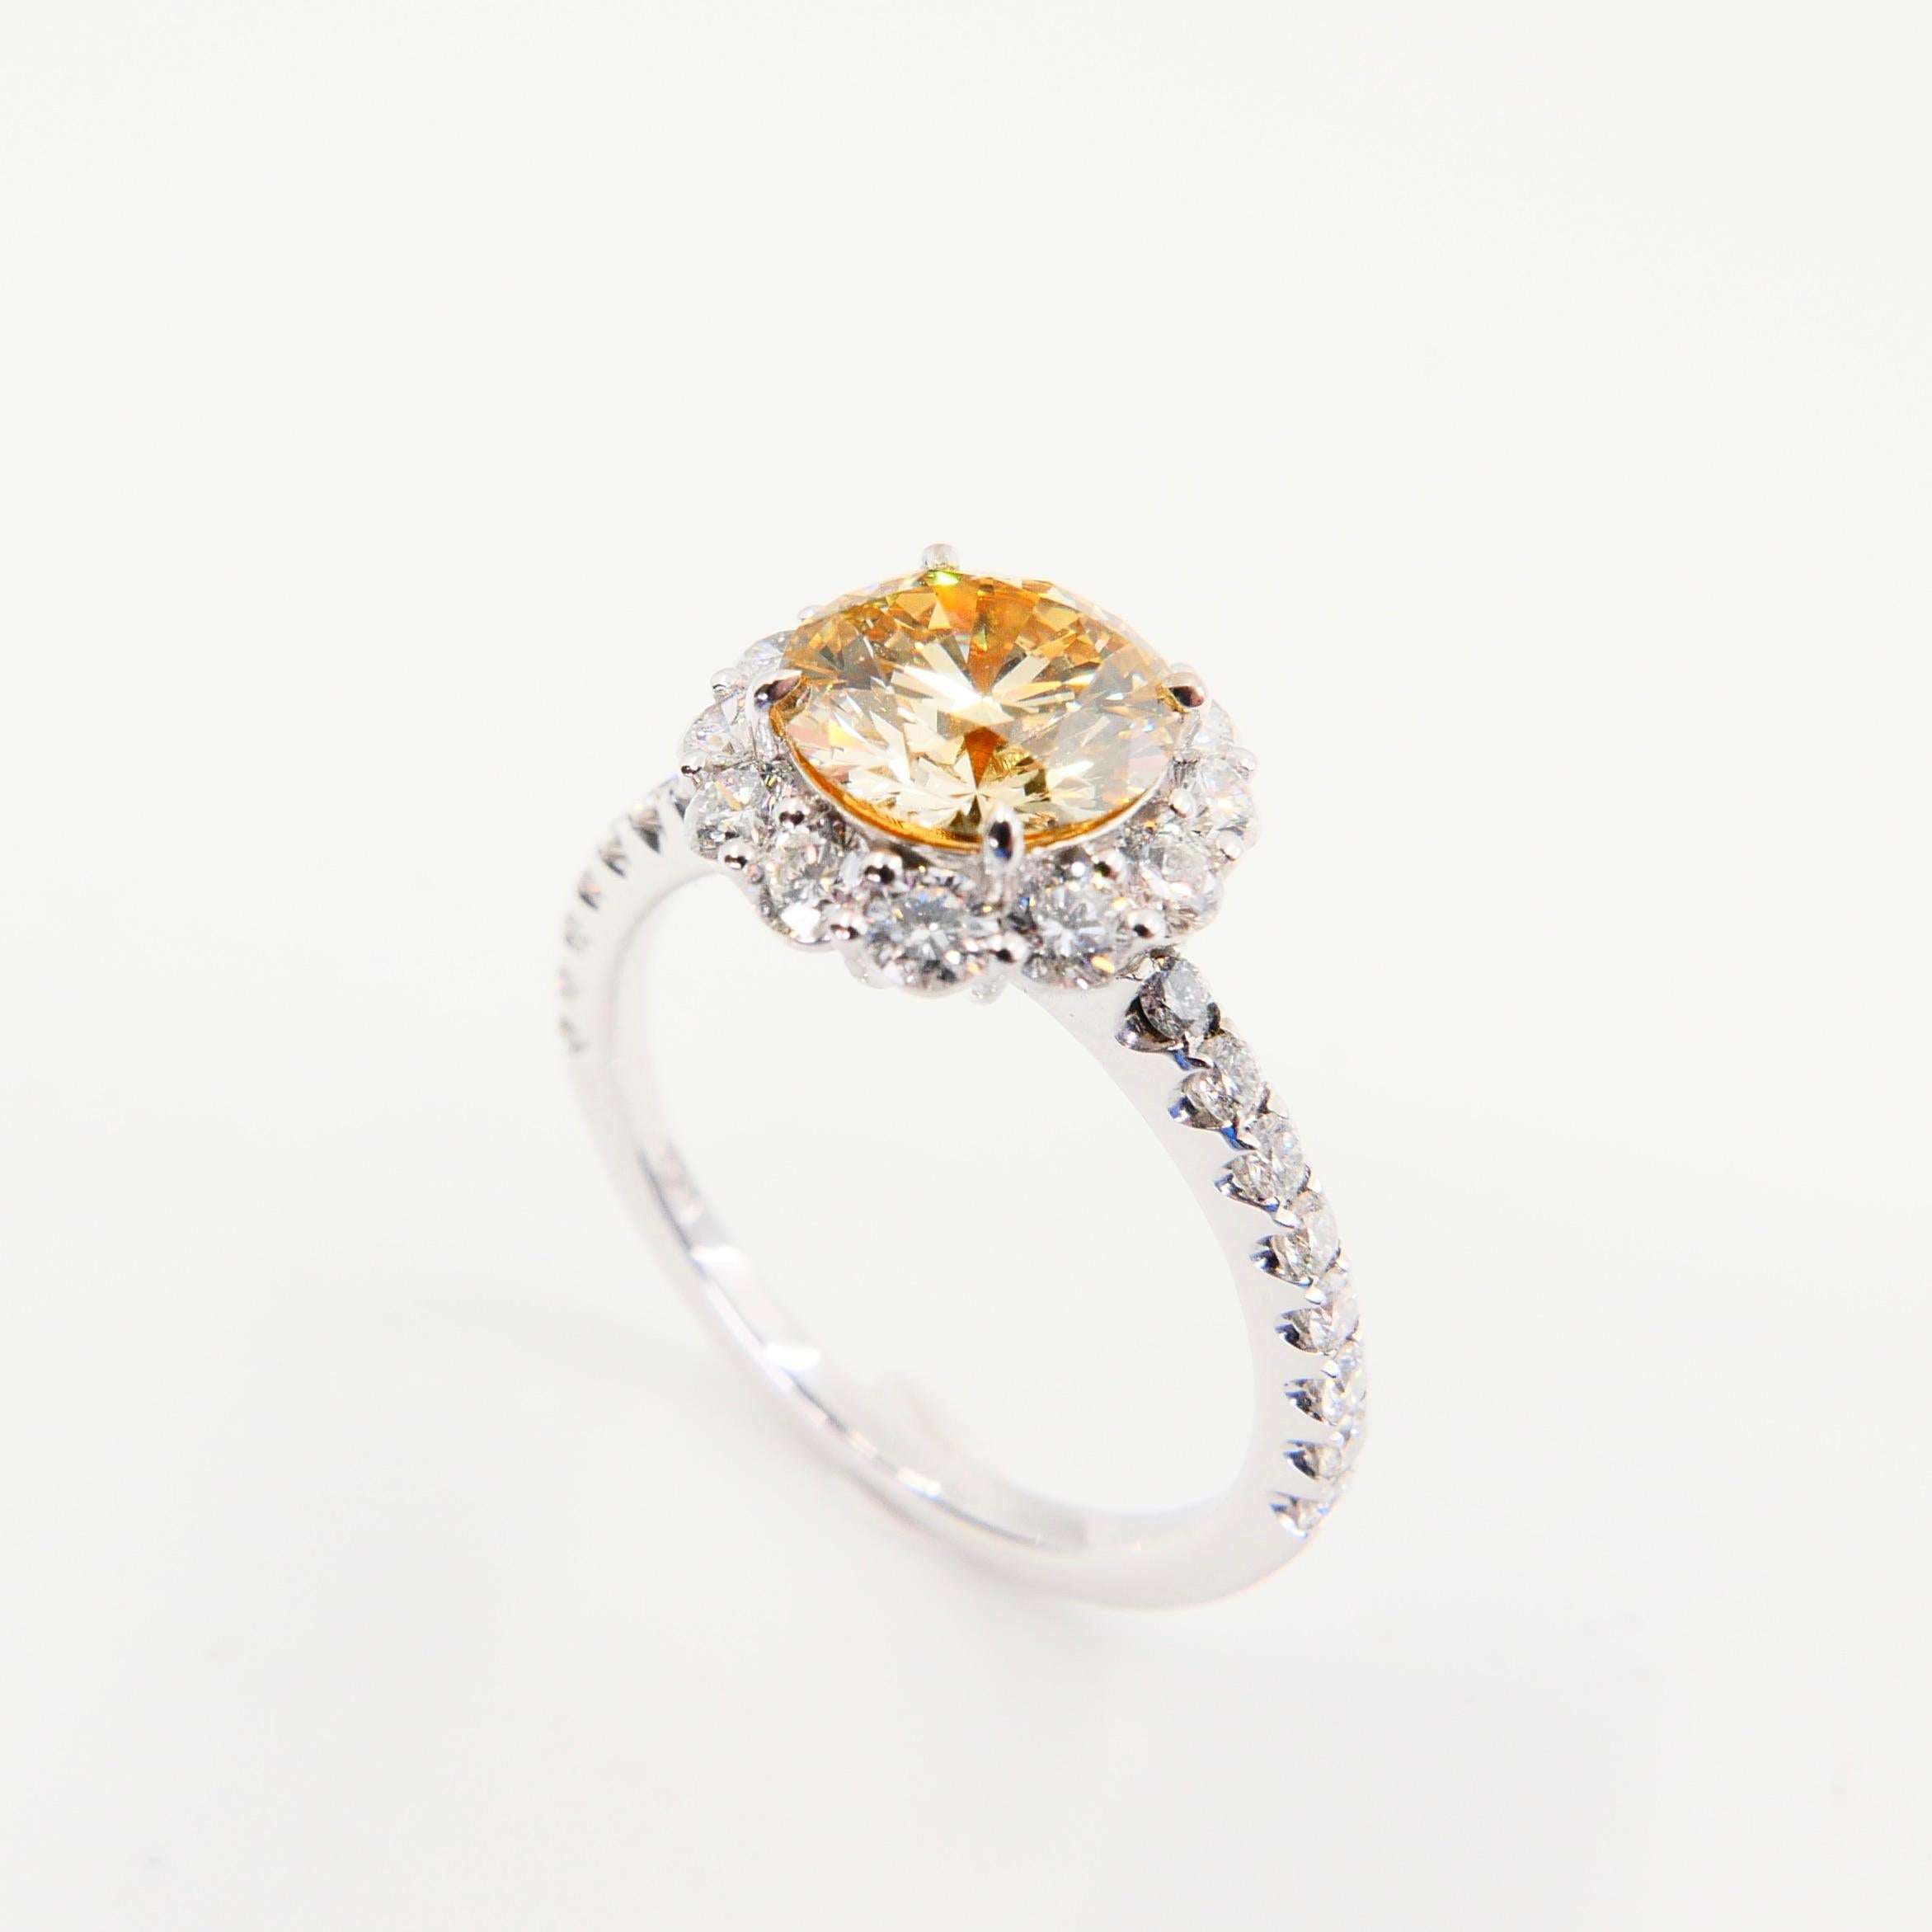 GIA Certified 1.23 Fancy Light Brownish Yellow Diamond Cocktail Ring VS2 Clarity 3